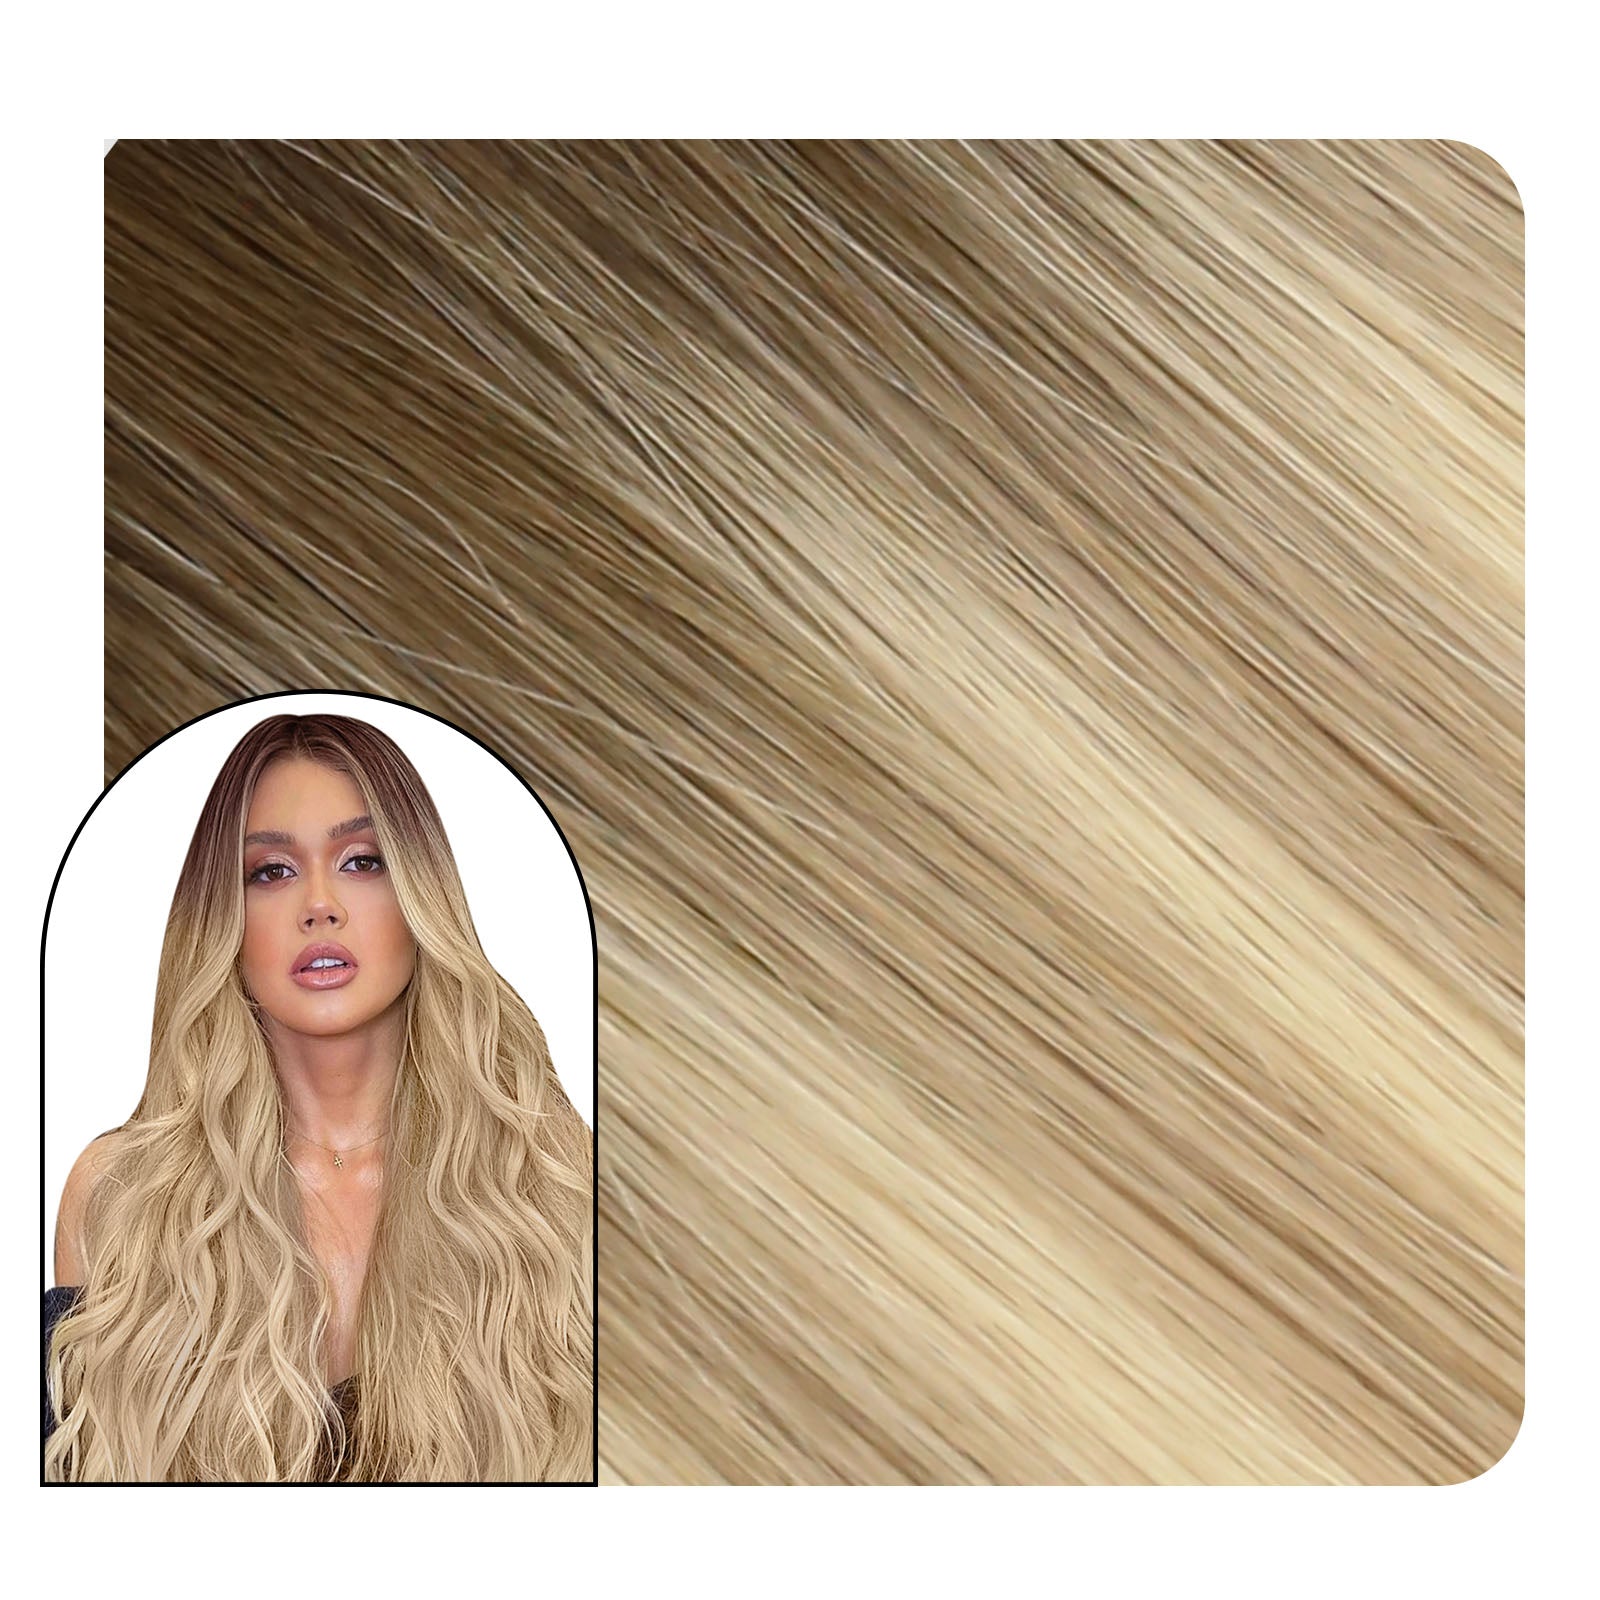 Full Cuticle Hybrid Weft Extensions Human Hair Balayage Color